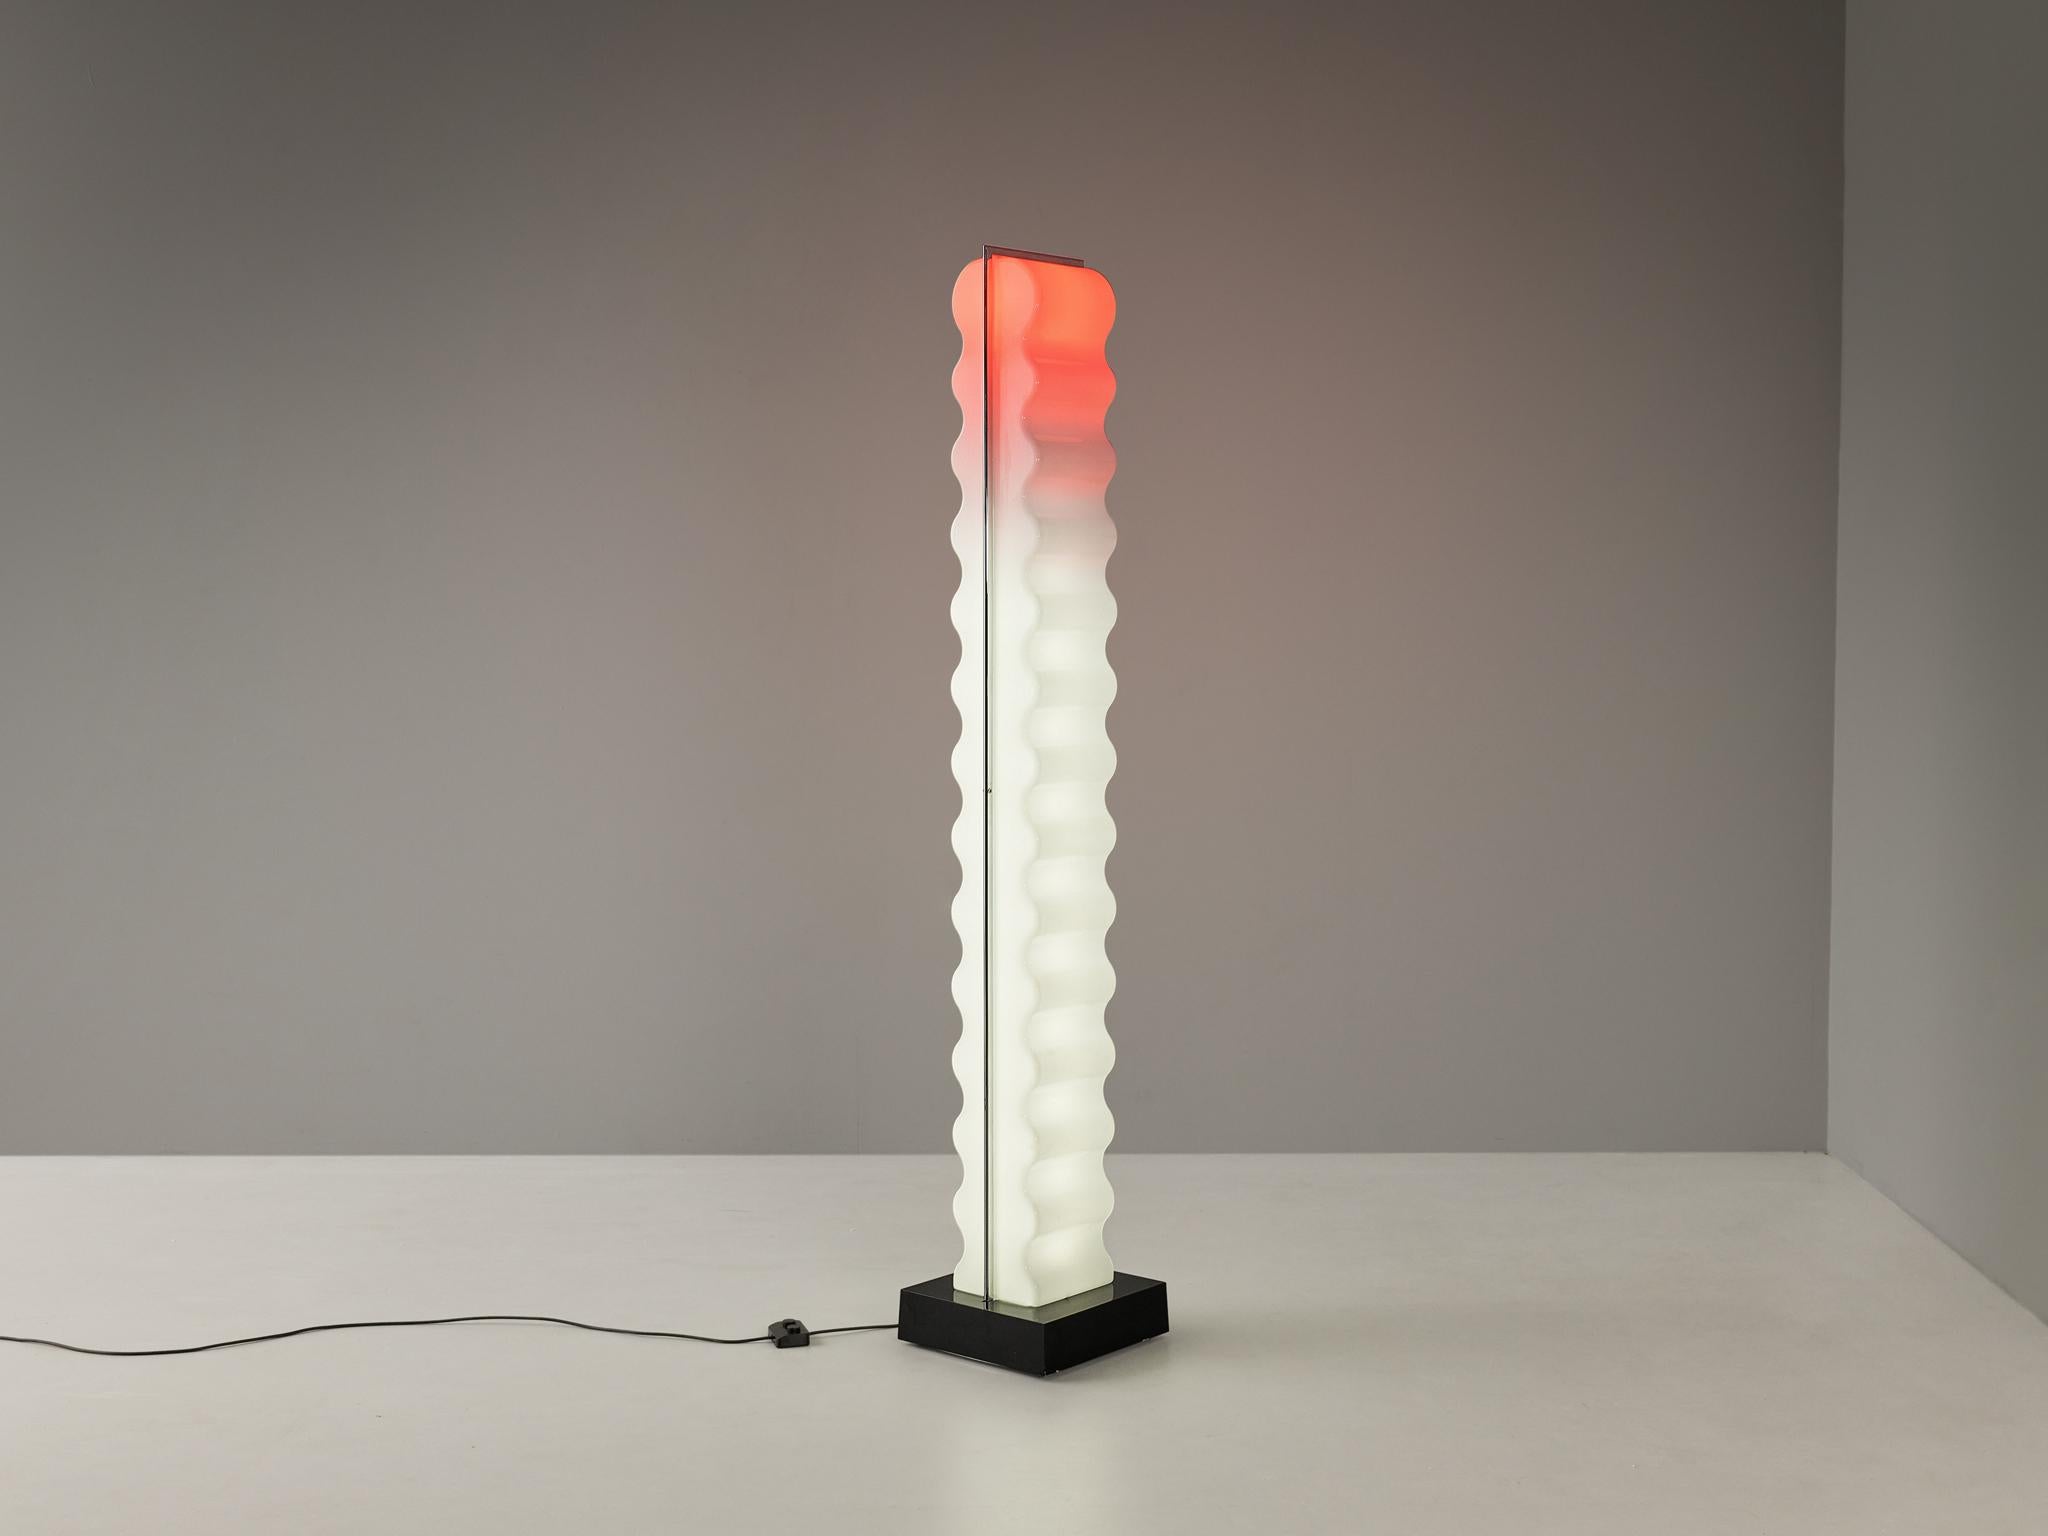 Ettore Sottsass for Poltronova, floor lamp, model 'Cometa' no. L026, acrylic, lacquered metal, chrome, Italy, design 1970

Funky and easy to love floor lamp designed by Ettore Sottsass for Poltronova in 1970.  Most striking are the wavy outer lines